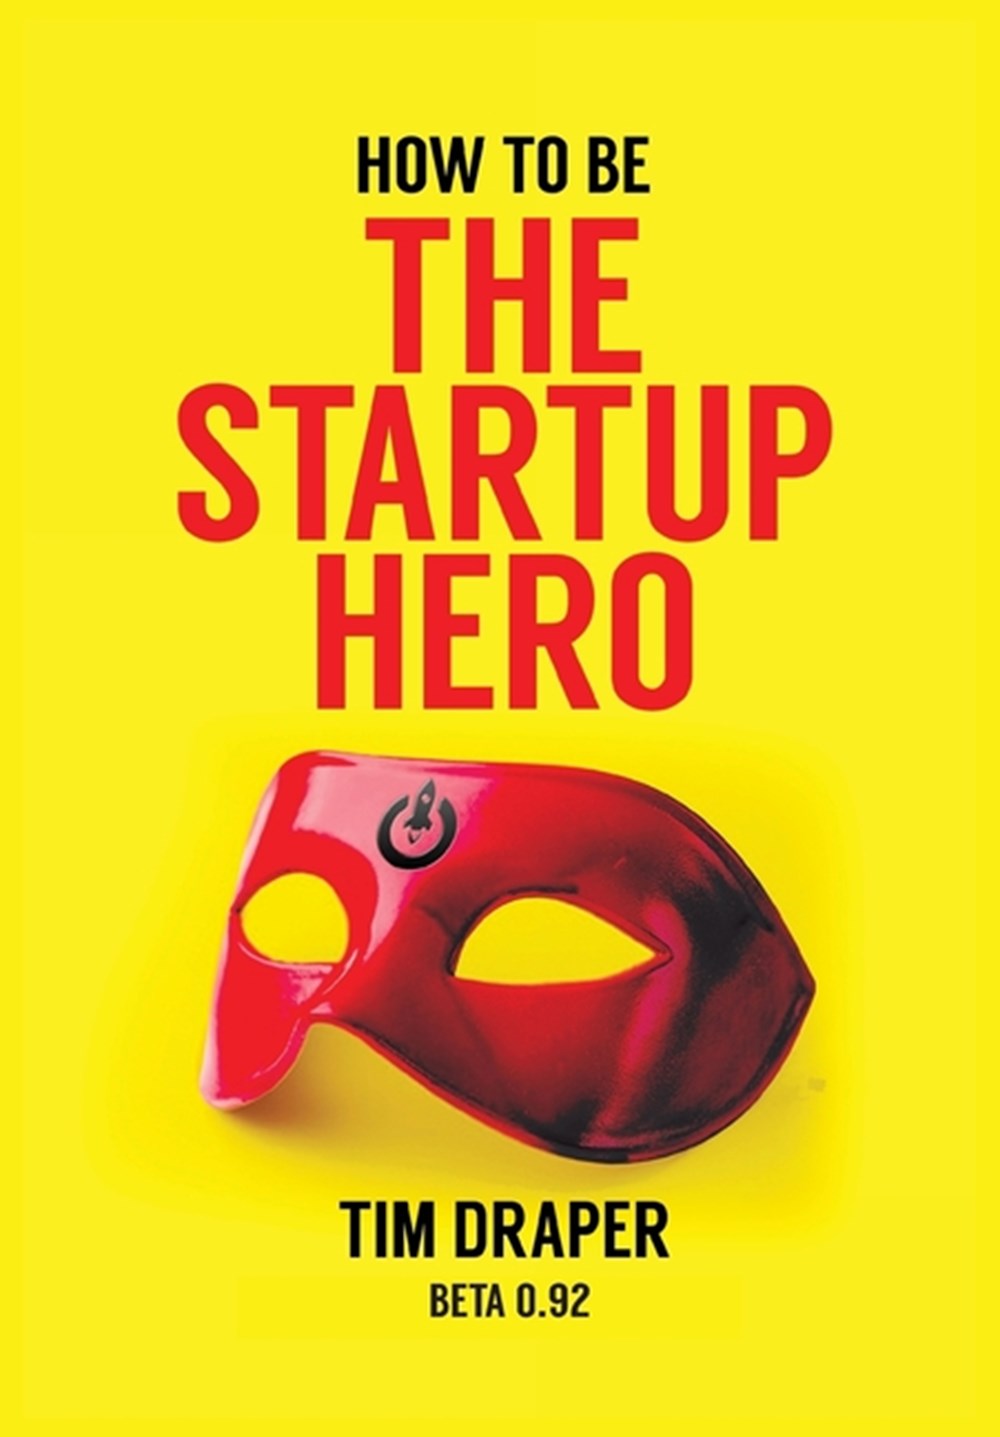 How to be The Startup Hero: Beta 0.92